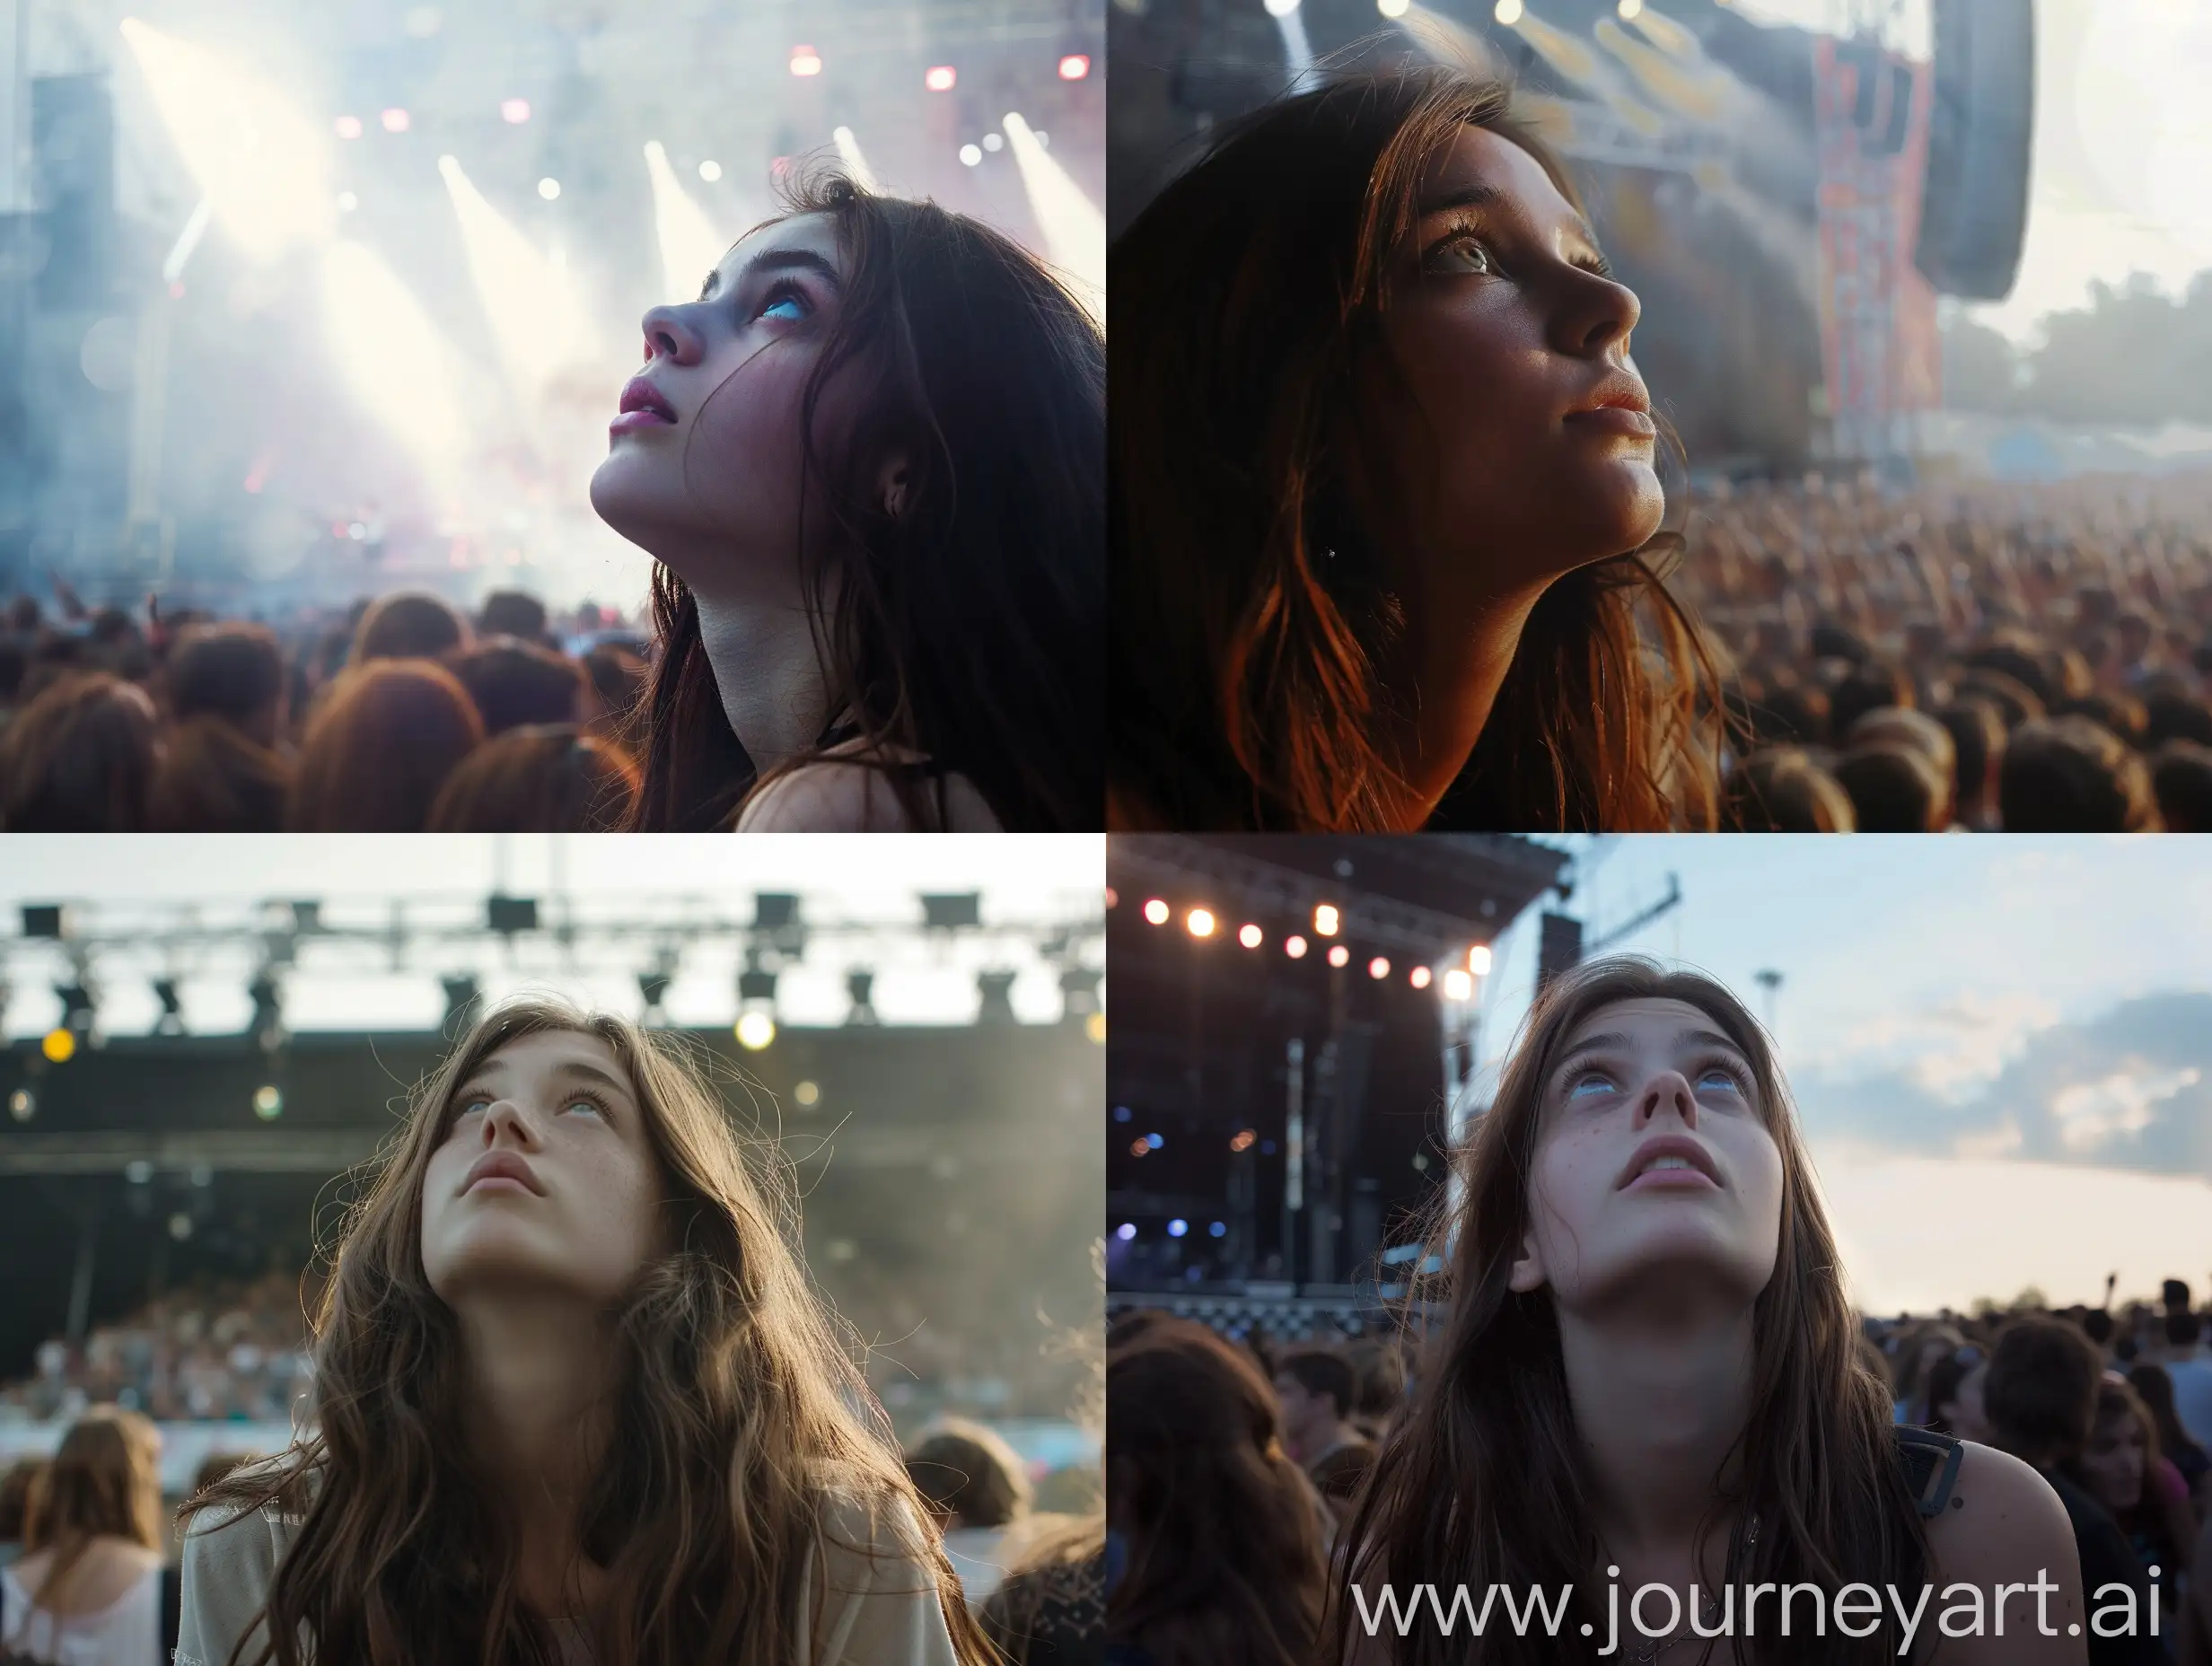 Young-Woman-Enthralled-by-Concert-Crowd